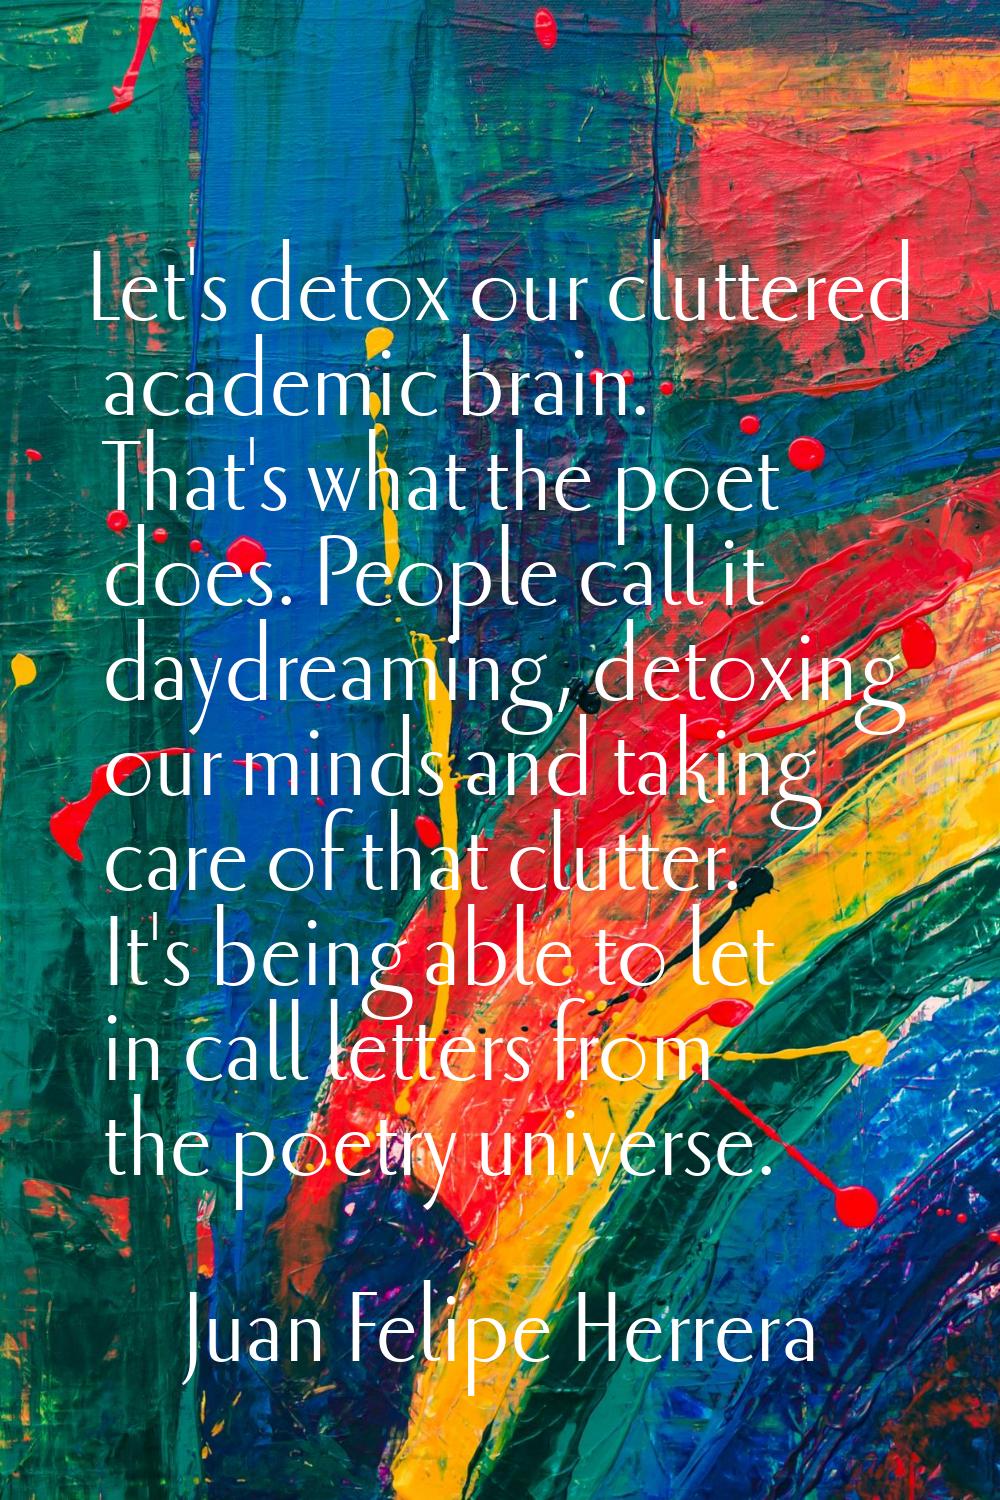 Let's detox our cluttered academic brain. That's what the poet does. People call it daydreaming, de